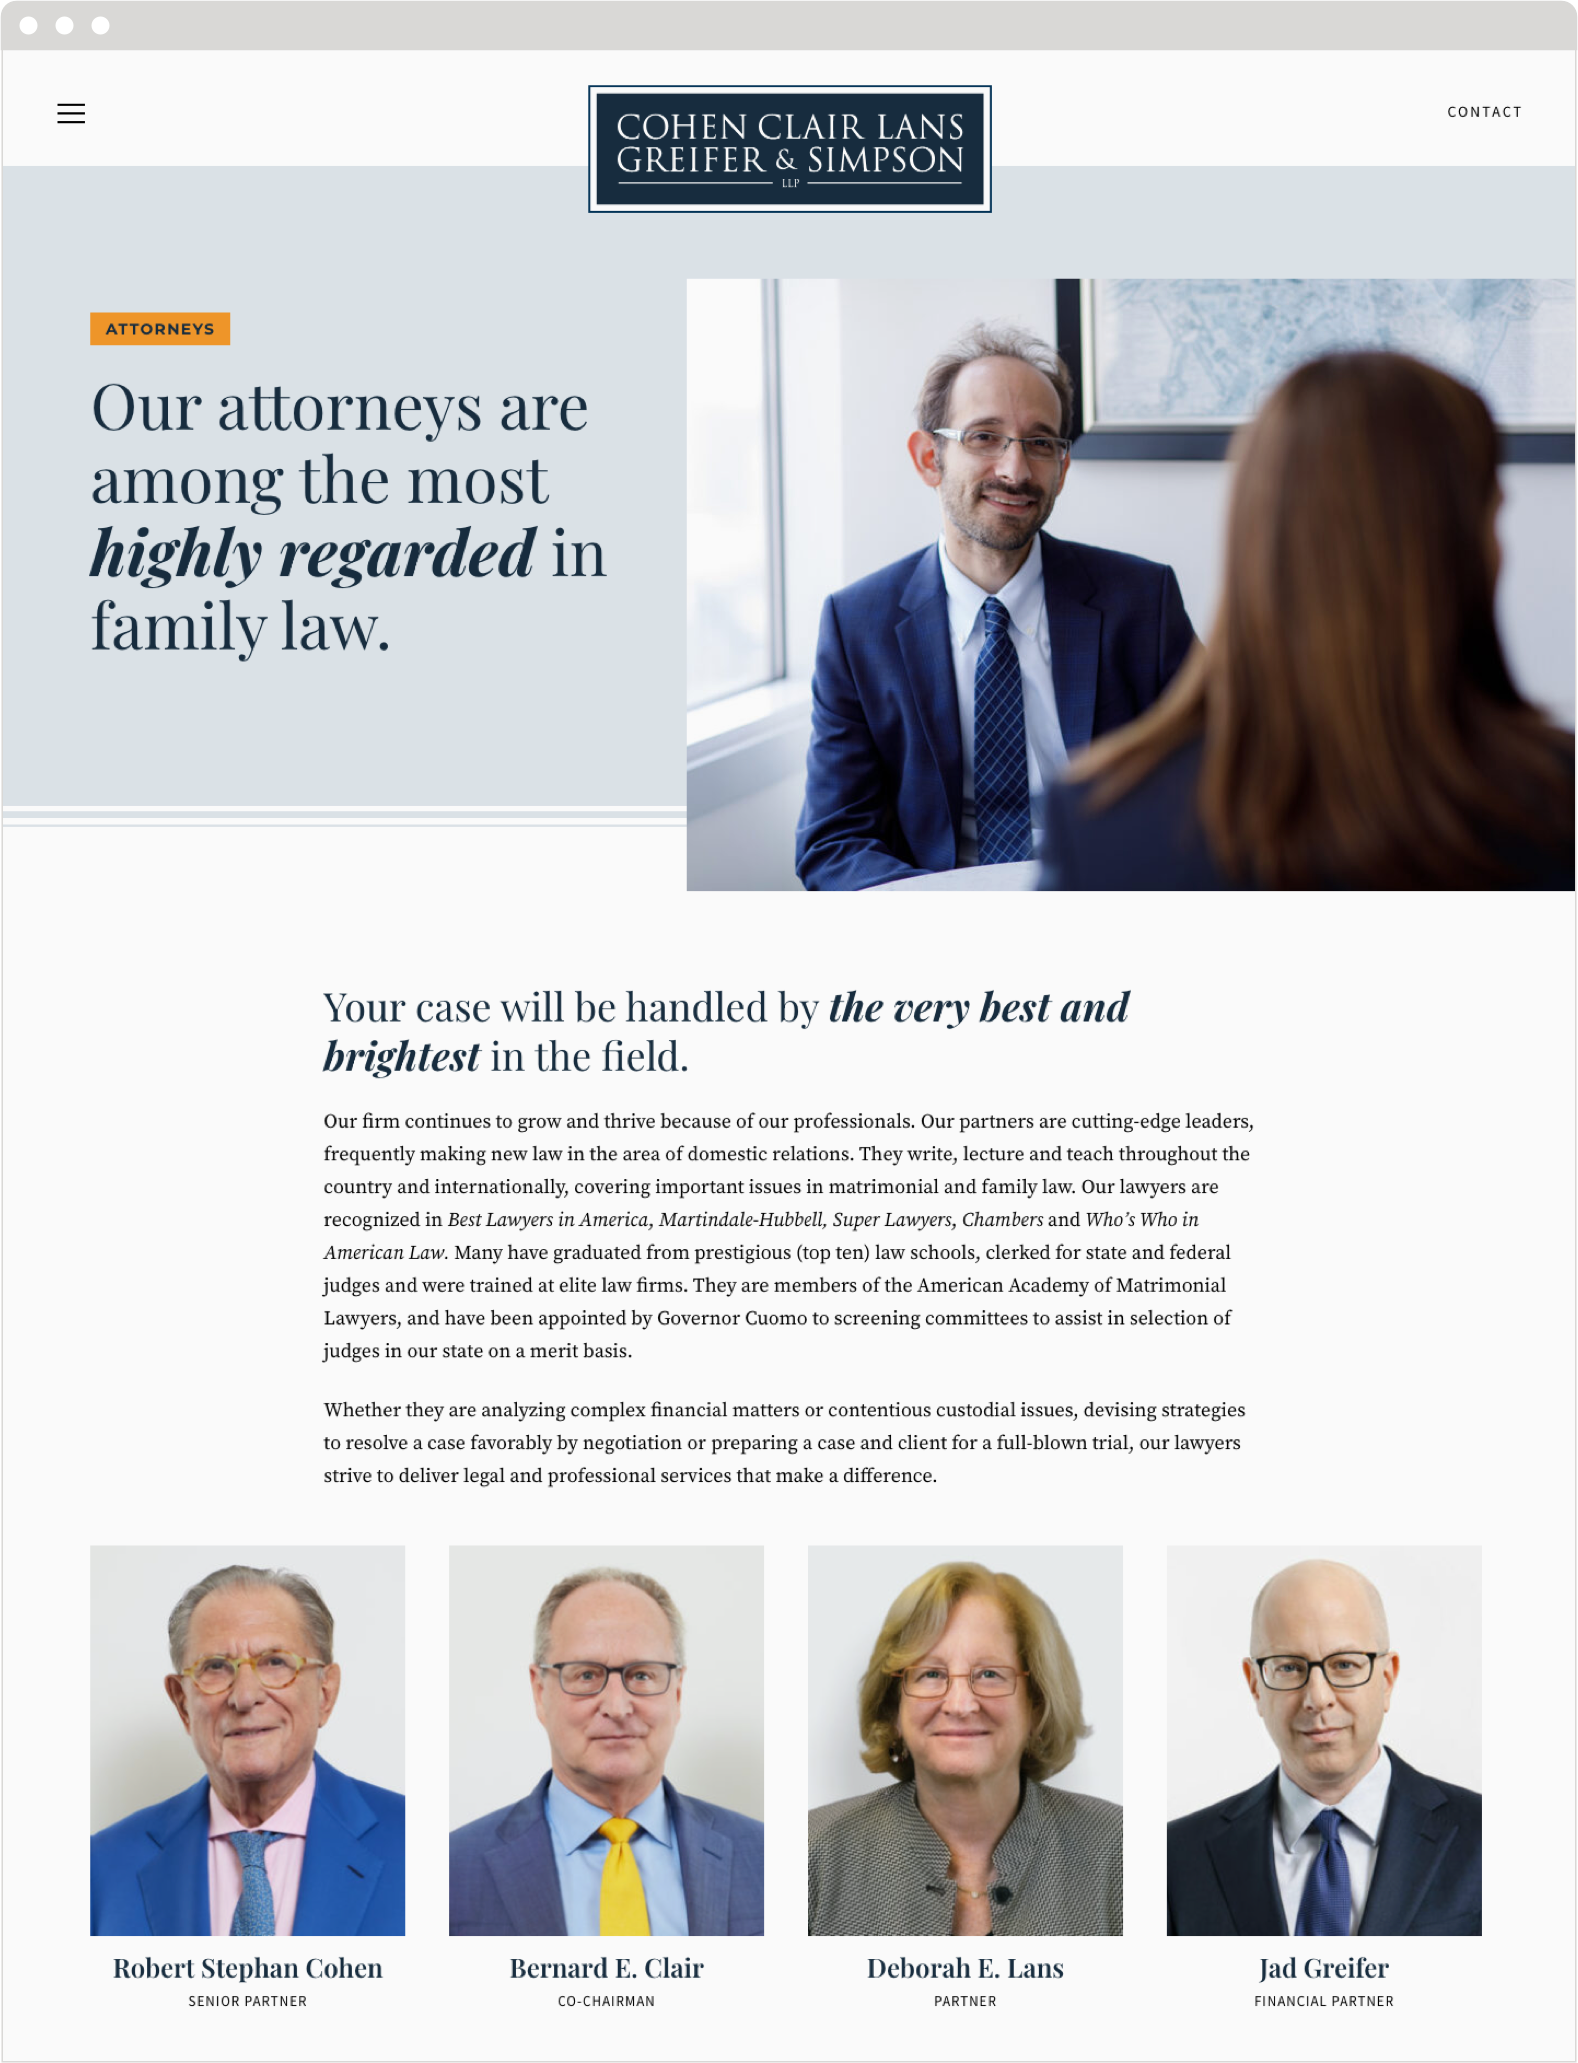 The Family Law Services section of the Cohen Clair website, featuring text about the firm’s capabilities and images of its lawyers in action.